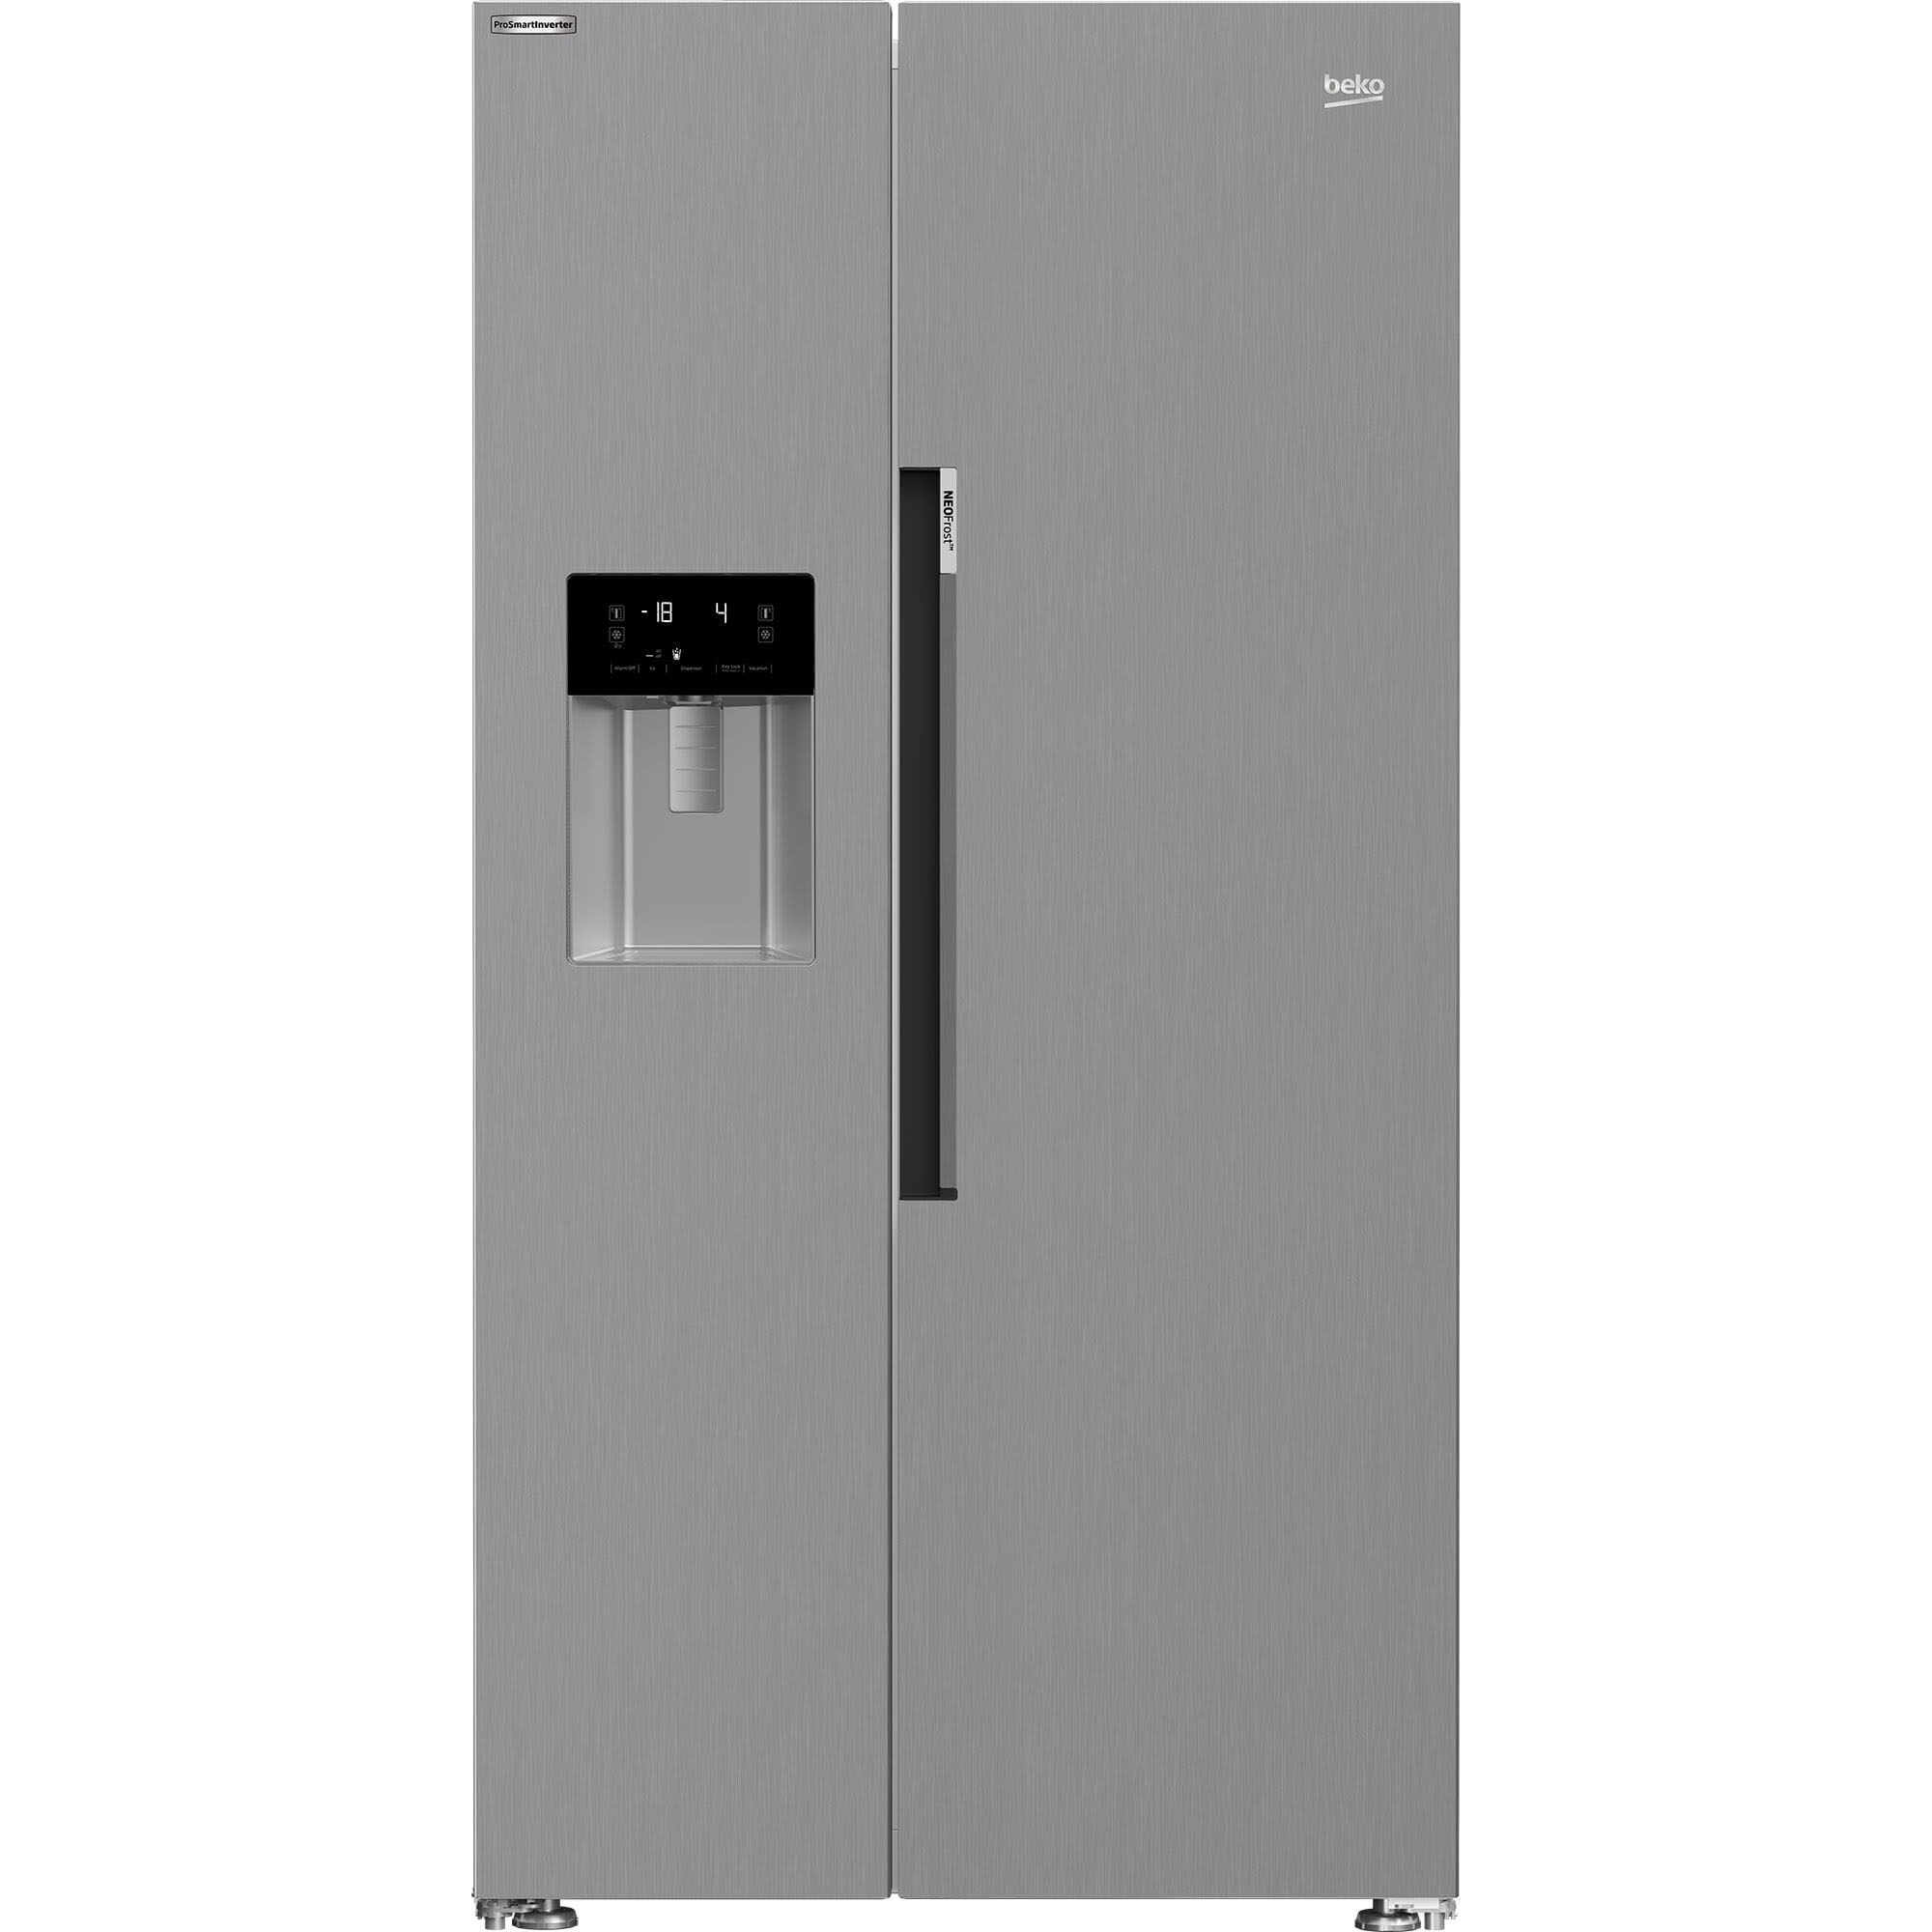 Frigider Side by side Beko 571 l, NeoFrost Dual Cooling, Dozator apa/gheata, Raft sticle, Touch control, Compresor Inverter, Clasa E, H 179 cm, Metal Look - eMAG.ro